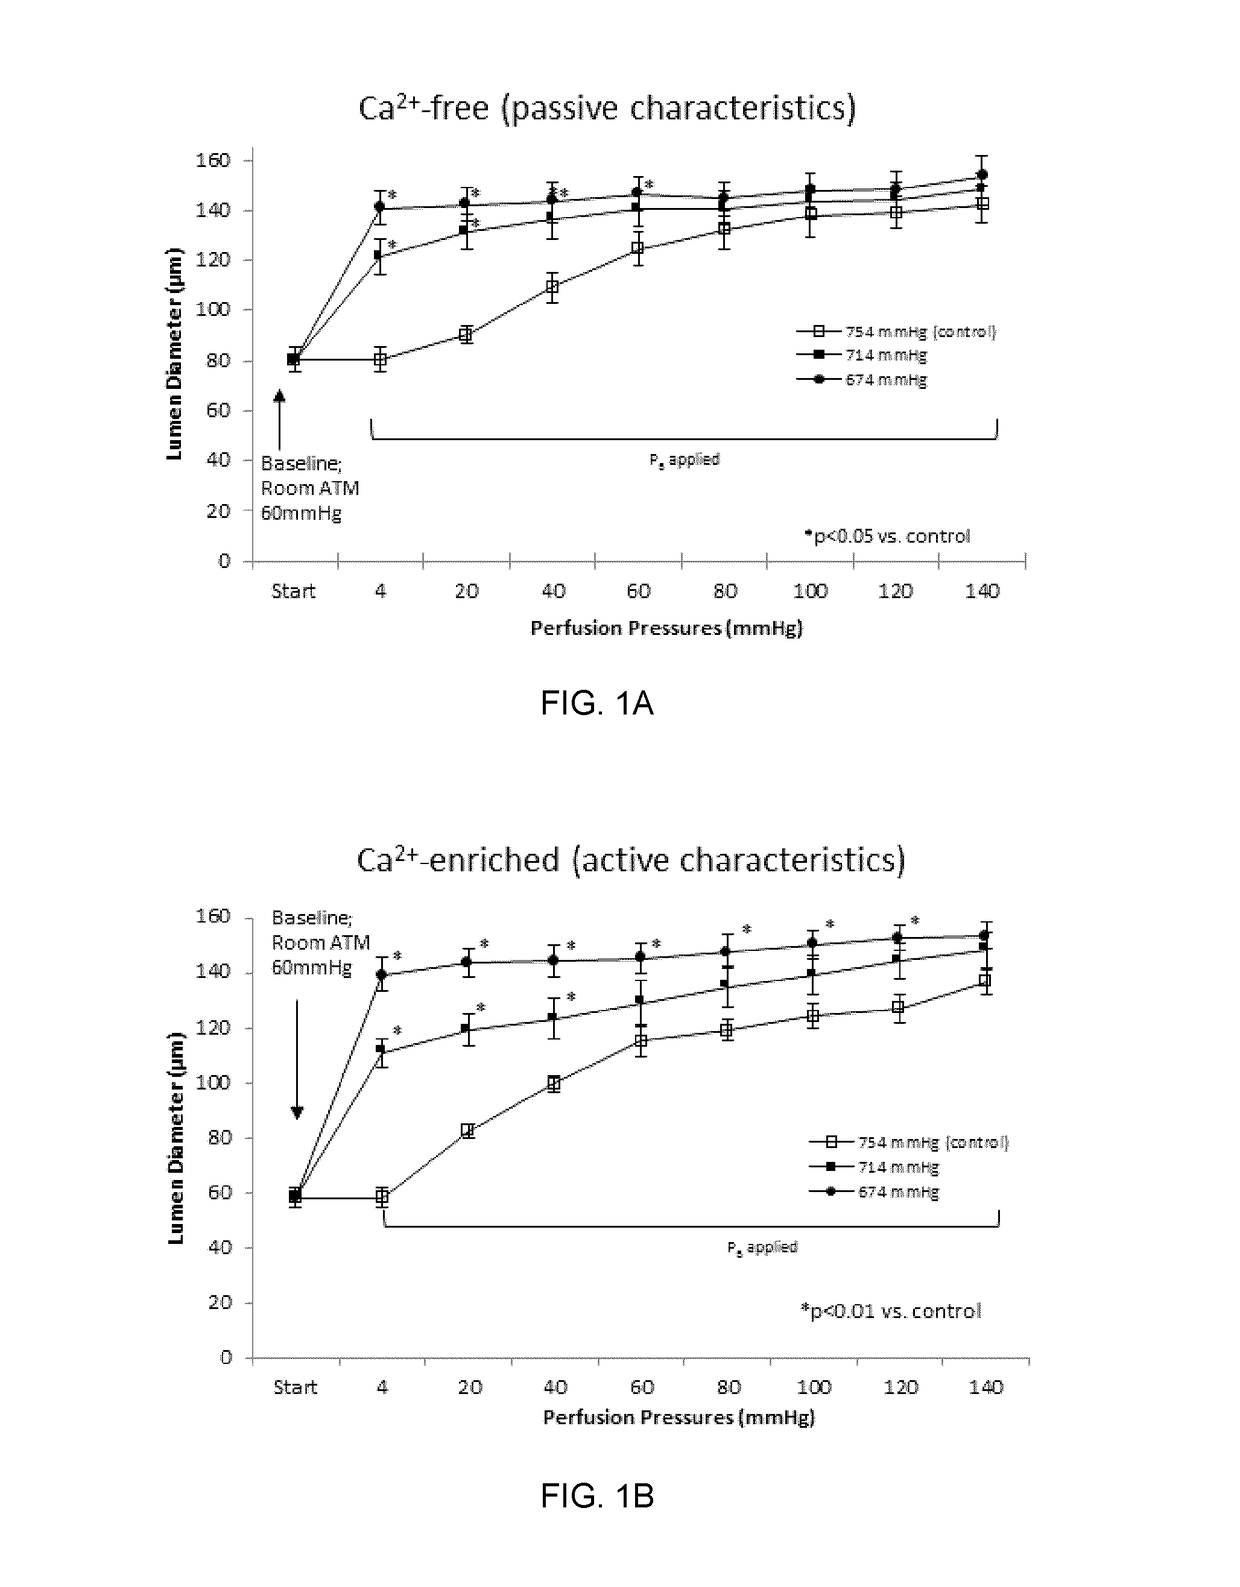 Enhancement of vasodilatory function and lowering of effective systemic vascular resistance